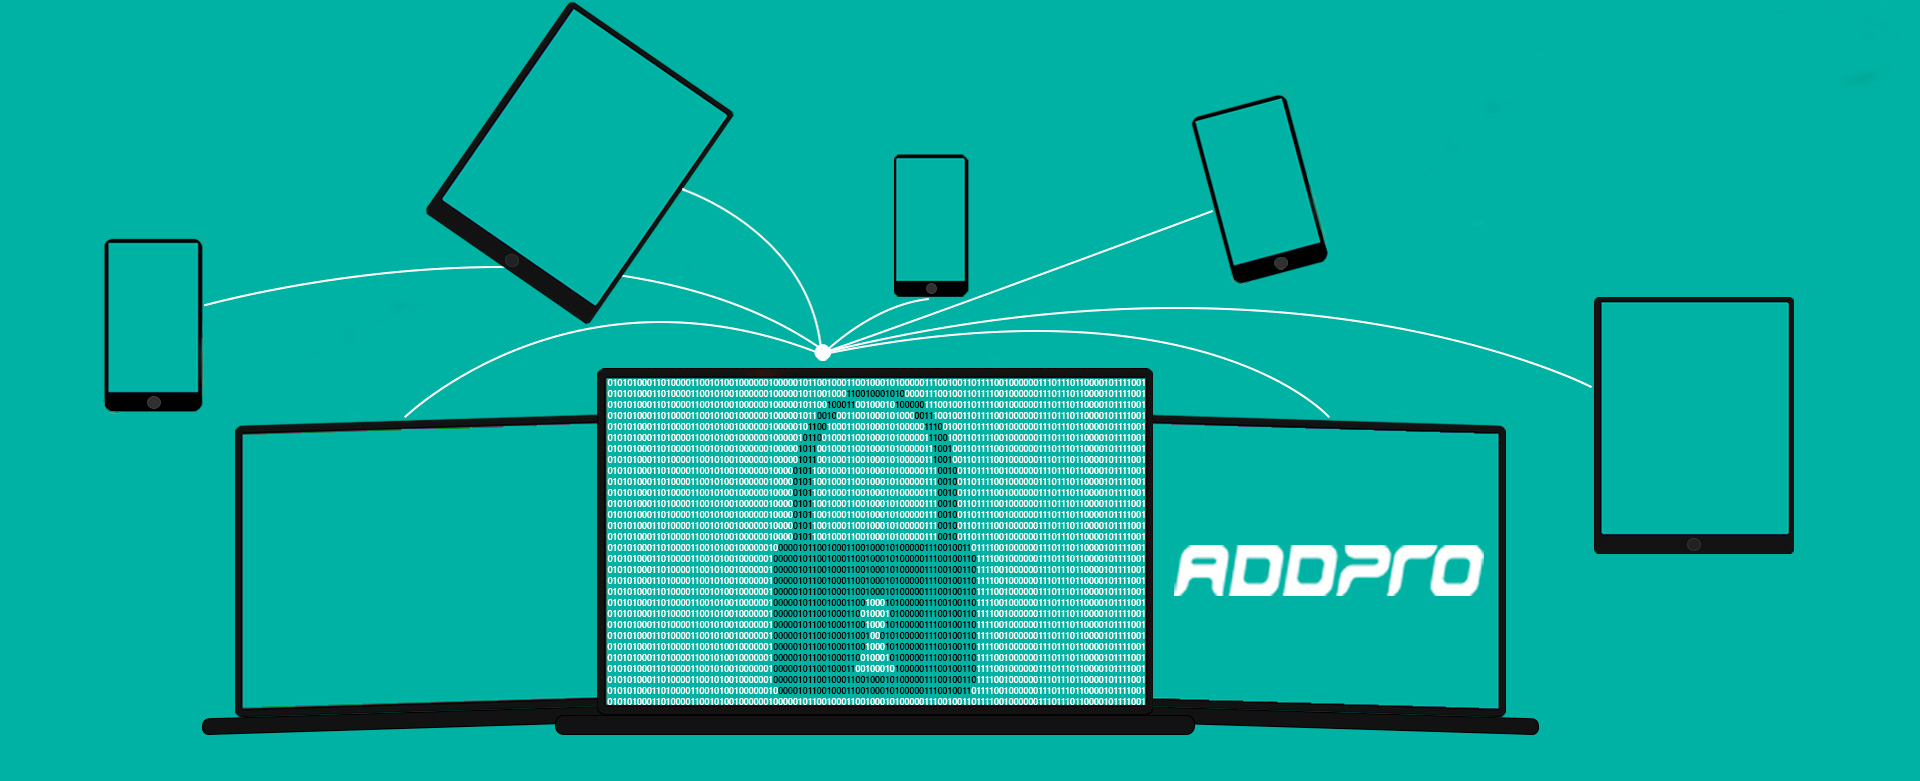 Enterprise Mobility + Security AddPro